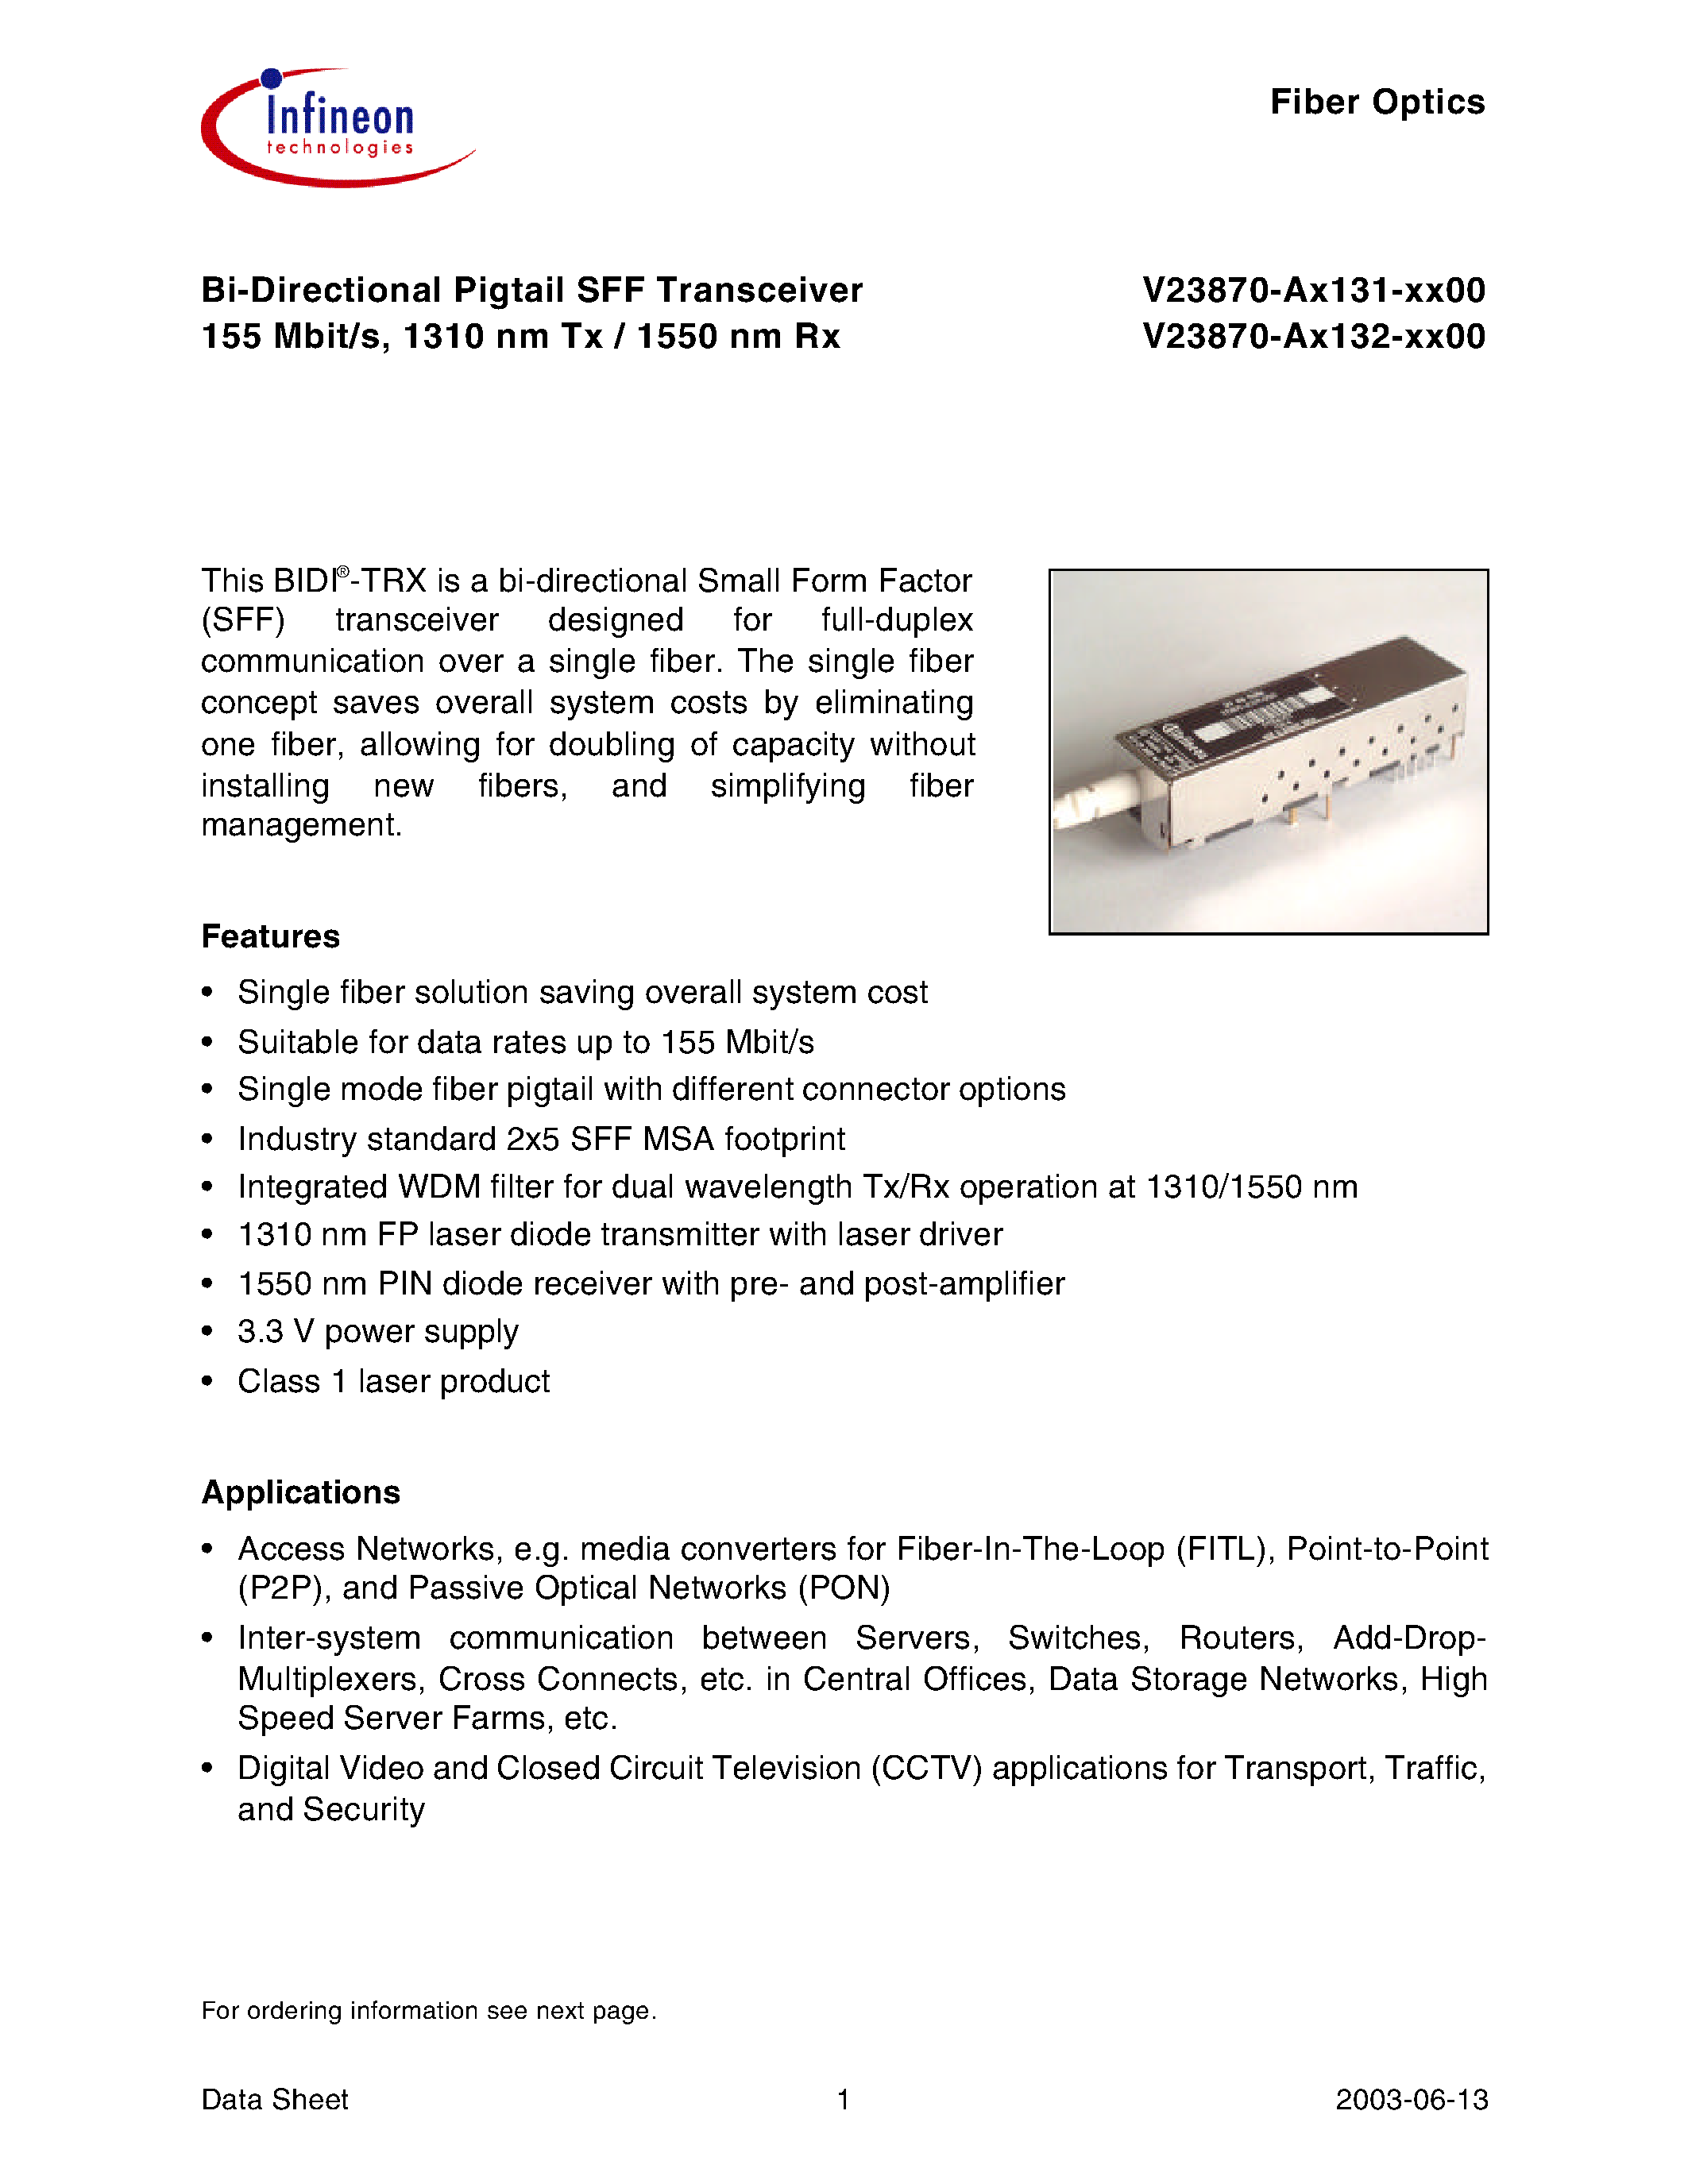 Datasheet V23870-A1132-A500 - Bi-Directional Pigtail SFF Transceiver 155 Mbit/s/ 1310 nm Tx / 1550 nm Rx page 1